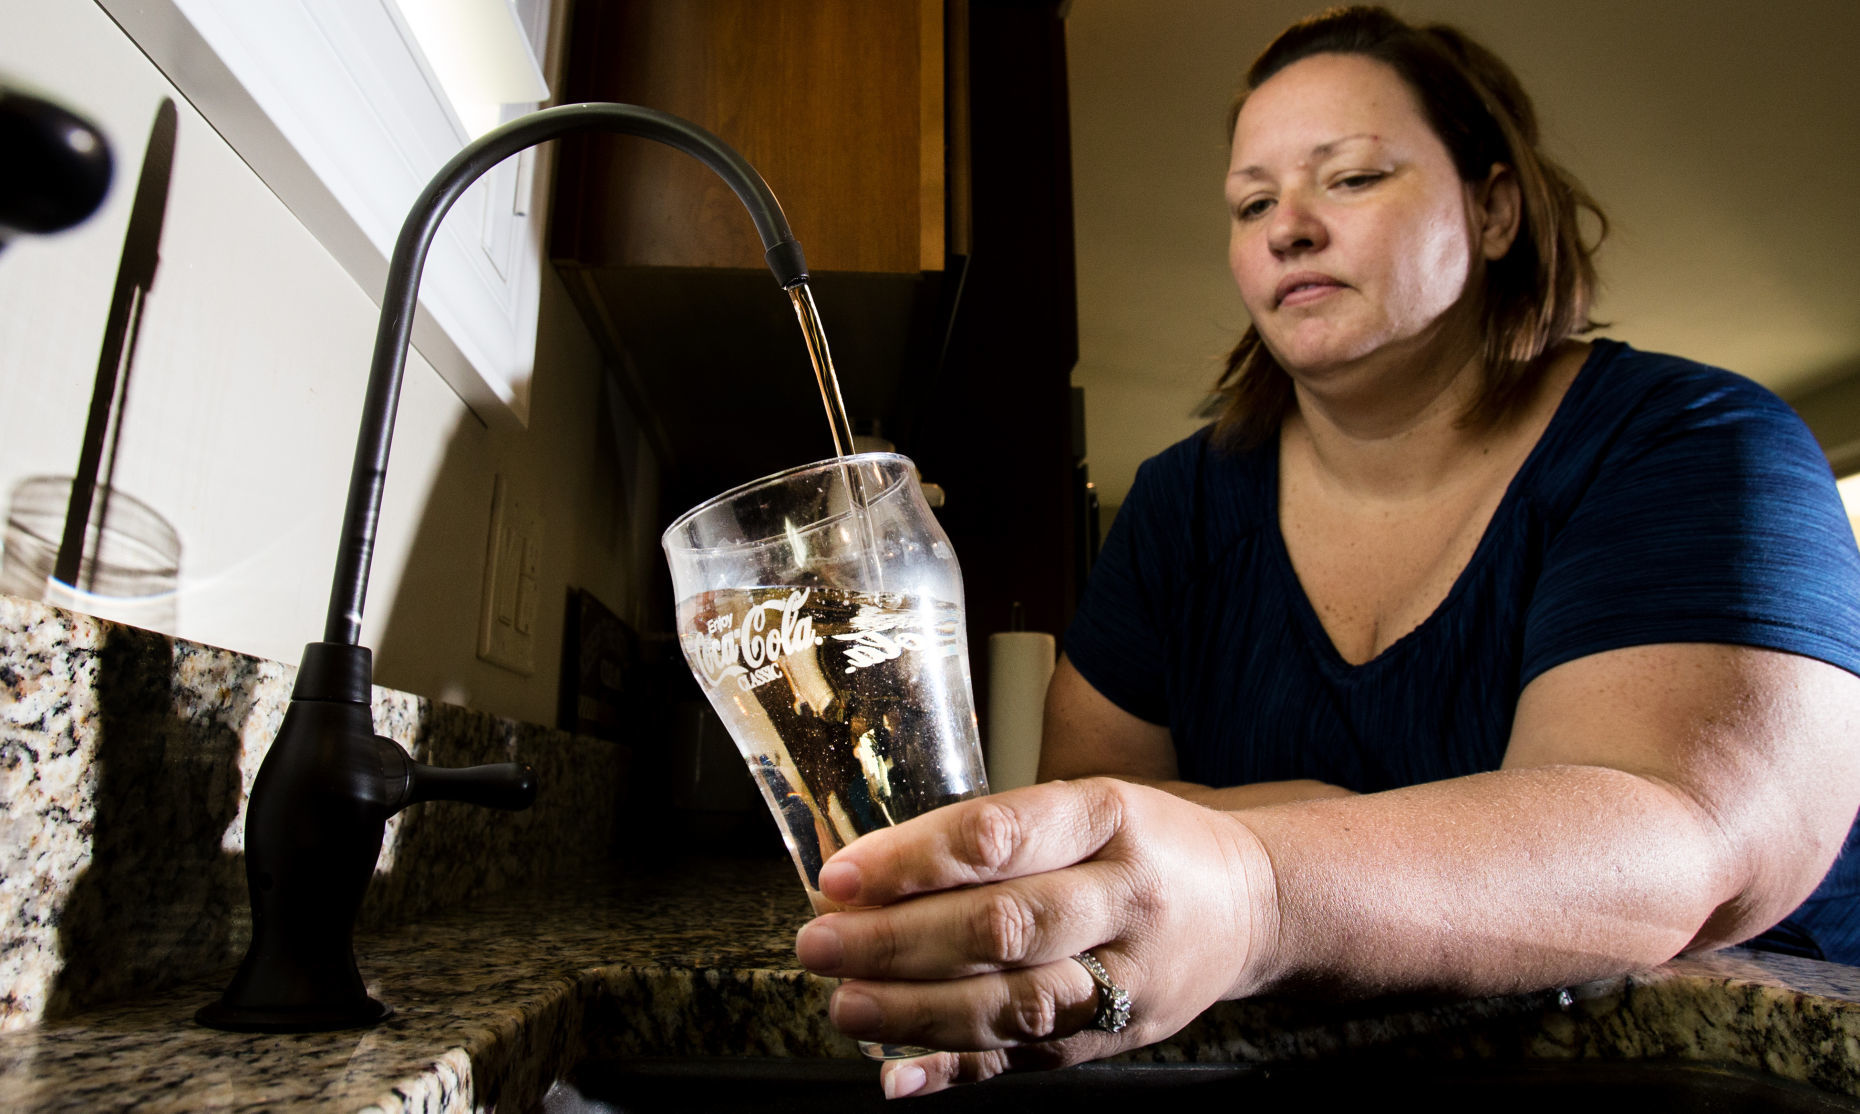 Chemicals in drinking water worry residents in Marana image